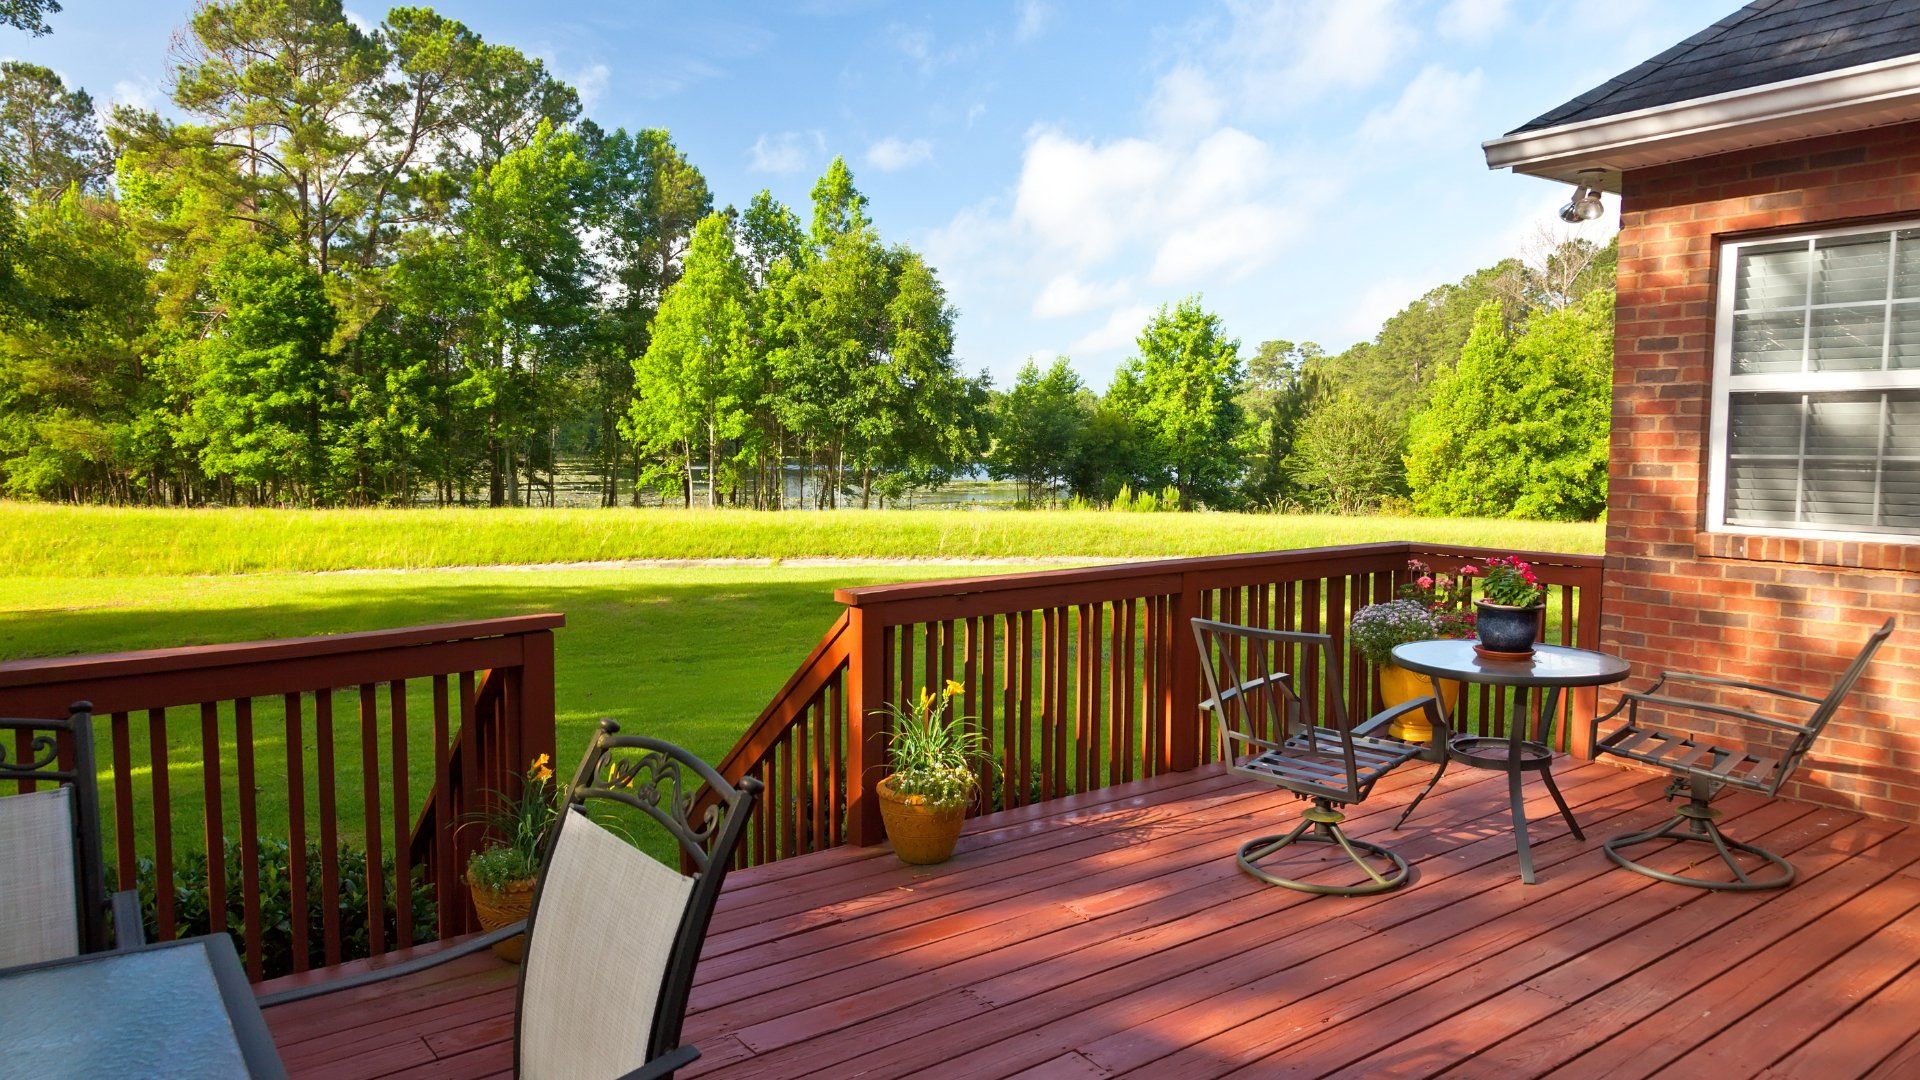 Backyard deck overlooking a large backyard.  The deck is stained a reddish colour and is attached to the house.